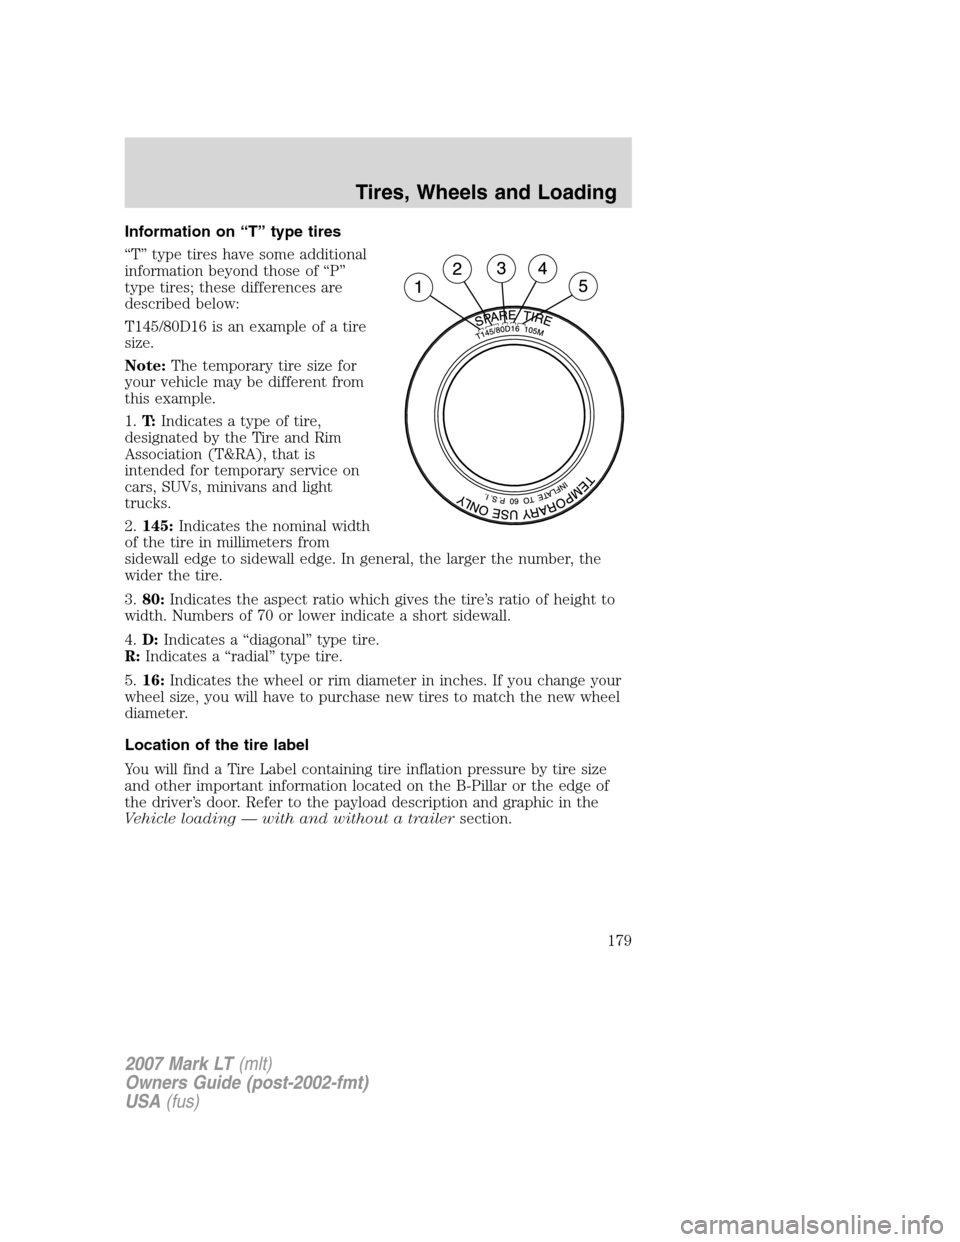 LINCOLN MARK LT 2007  Owners Manual Information on “T” type tires
“T” type tires have some additional
information beyond those of “P”
type tires; these differences are
described below:
T145/80D16 is an example of a tire
size